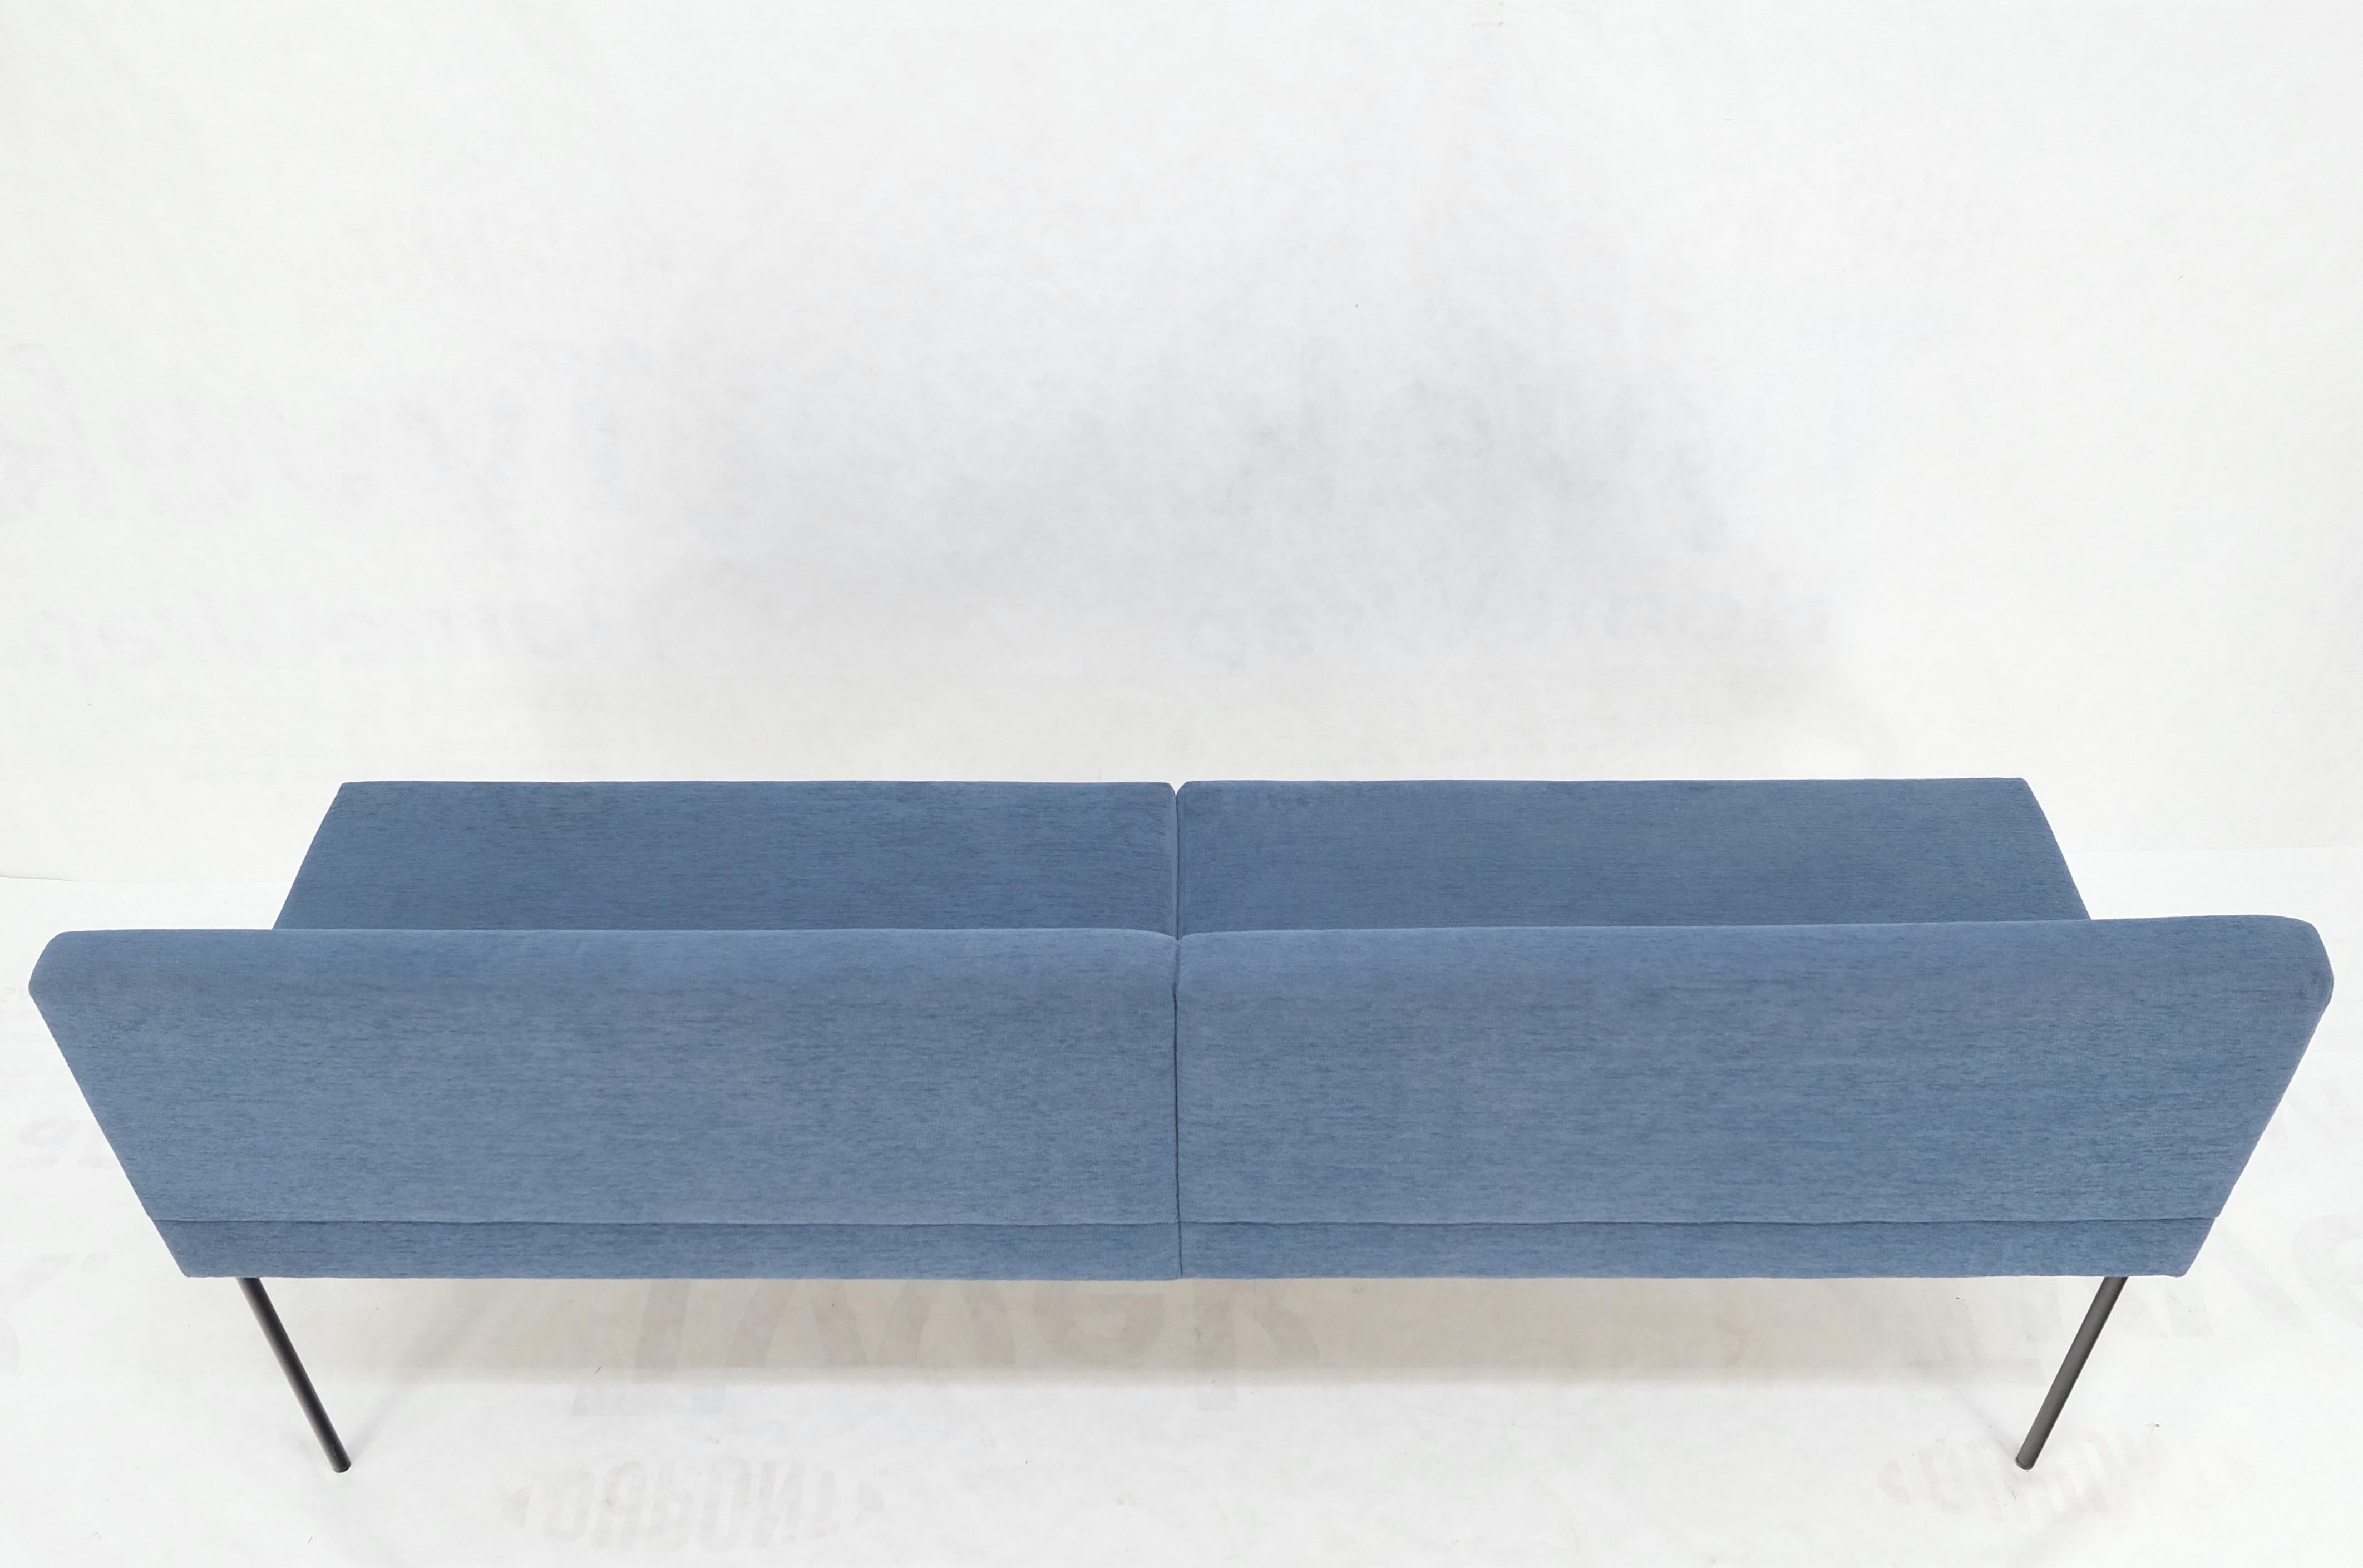 Geiger Tuxido Lounge Sofa Couch Bench Seating Blue Upholstery Black Frame Mint For Sale 4